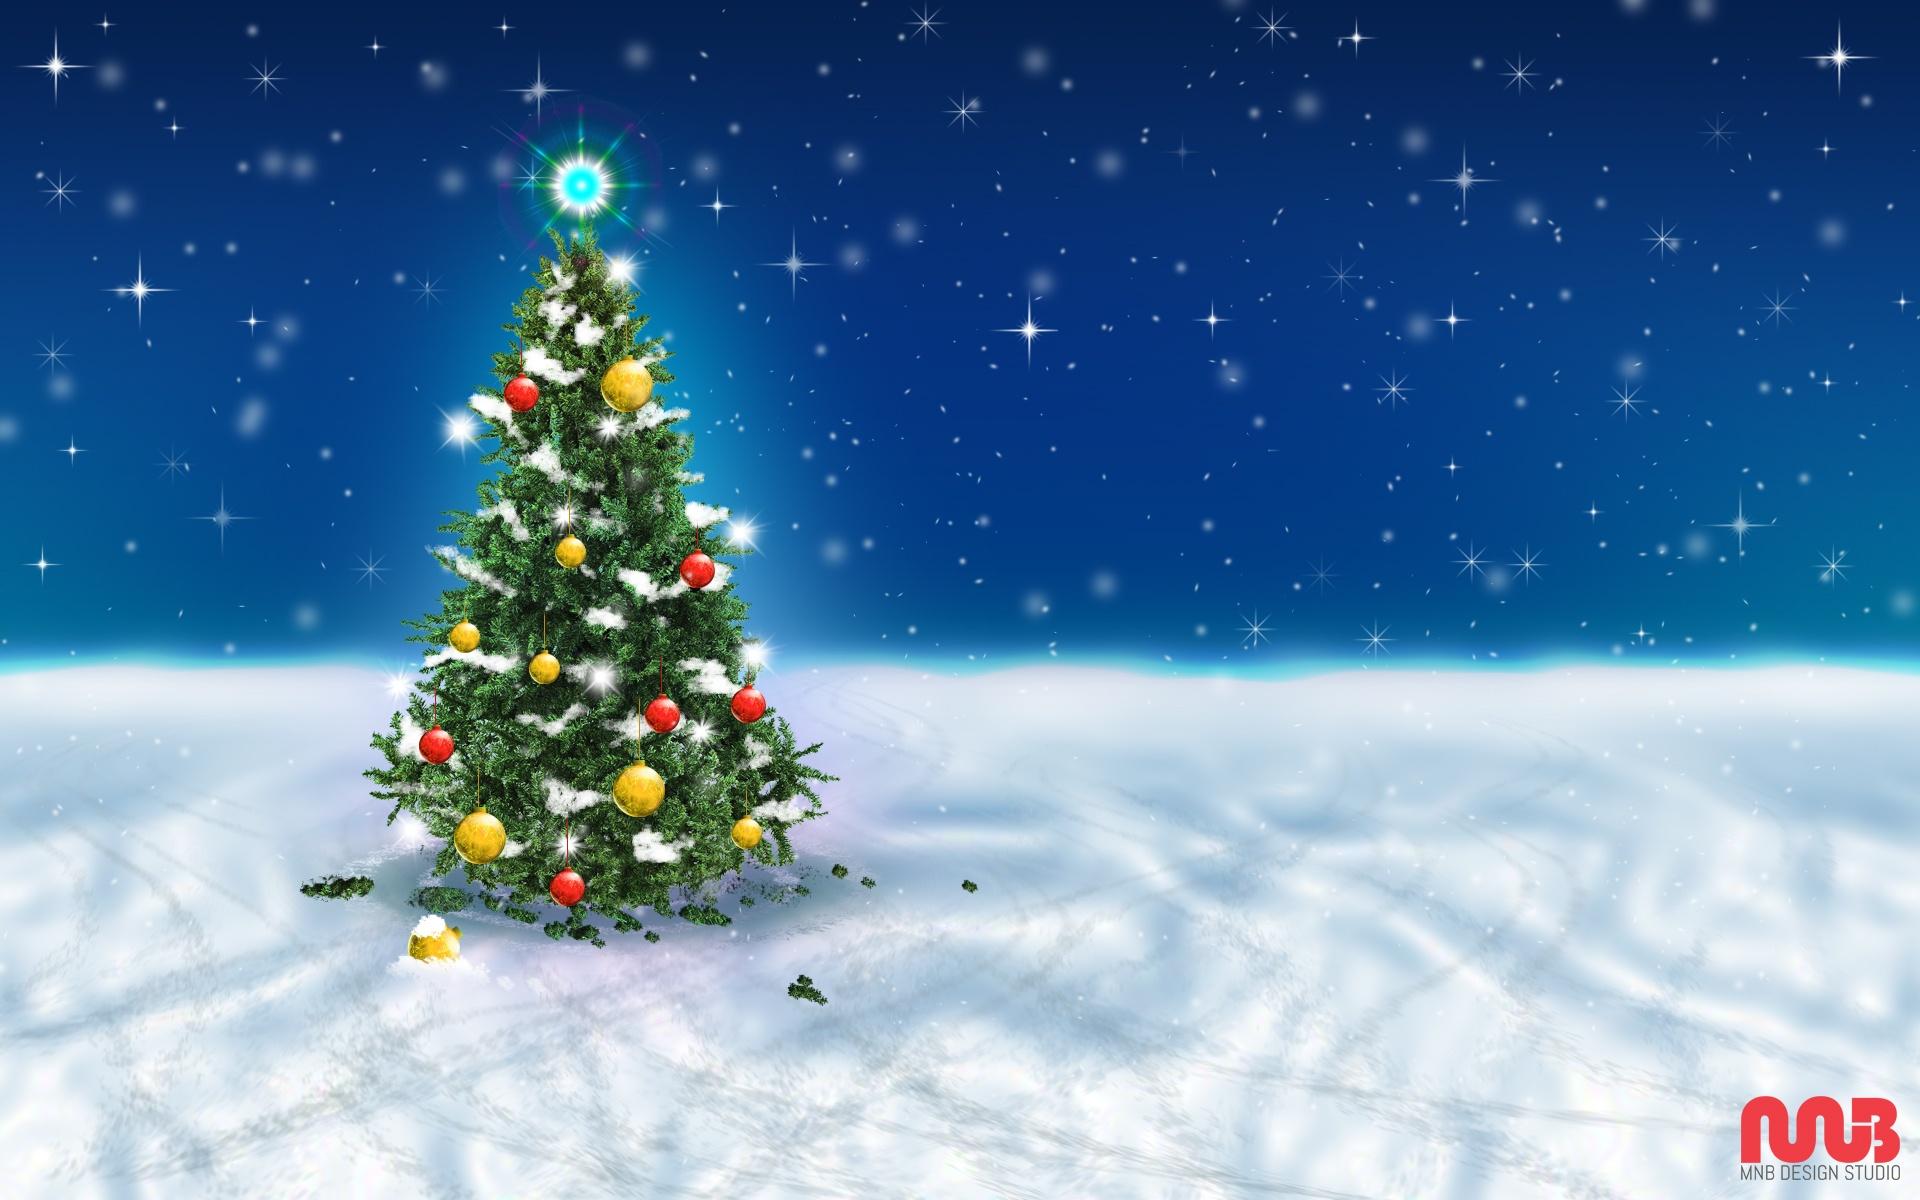 Christmas Tree Snow Sky Wallpaper in jpg format for free download